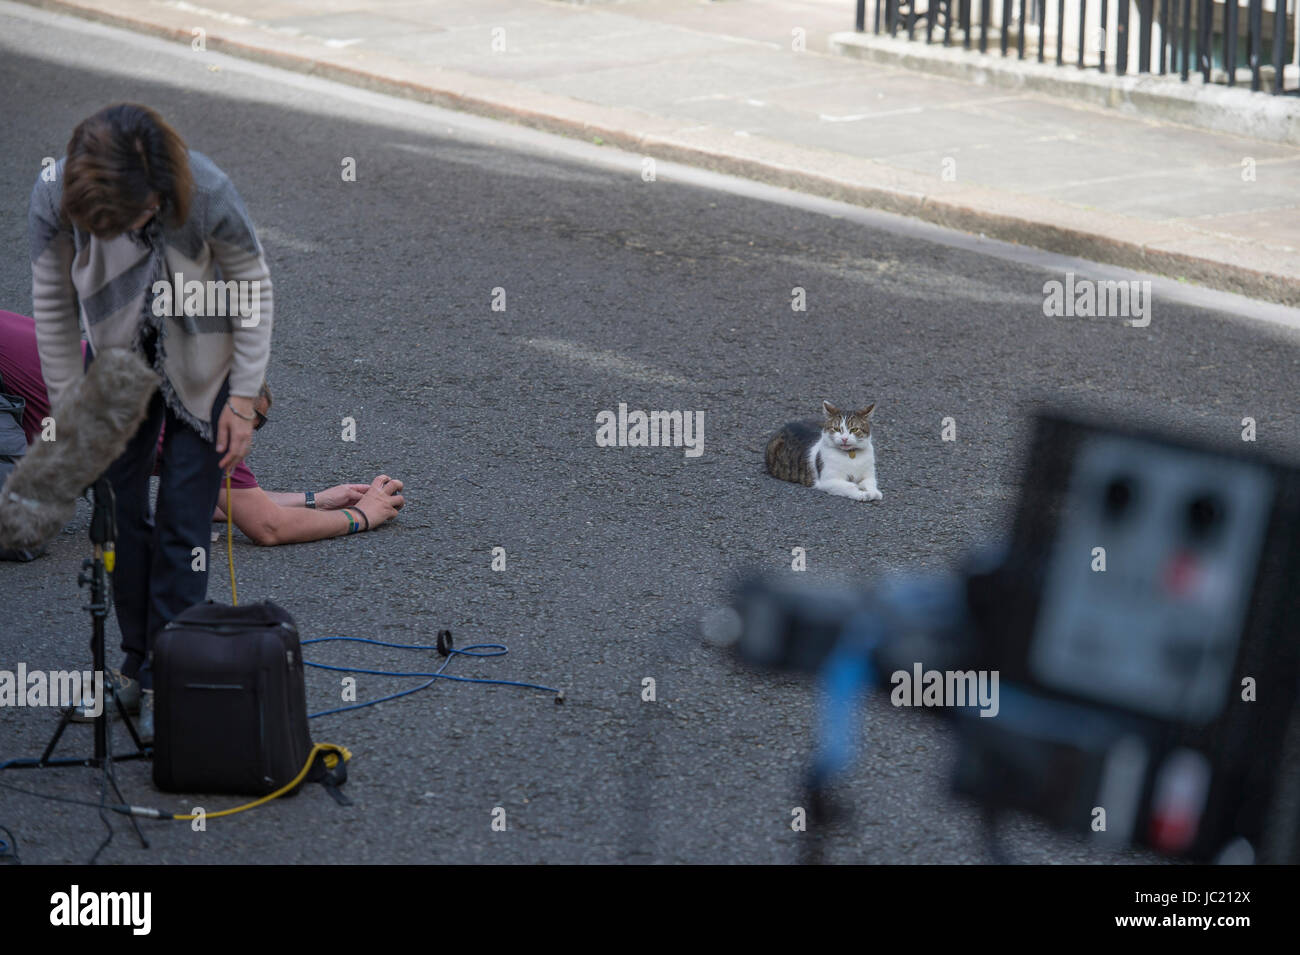 Downing Street, London, UK. 13th June, 2017. Larry the cat receives media attention while waiting for the DUP leader to arrive in Downing Street. Credit: Malcolm Park/Alamy Live News. Stock Photo